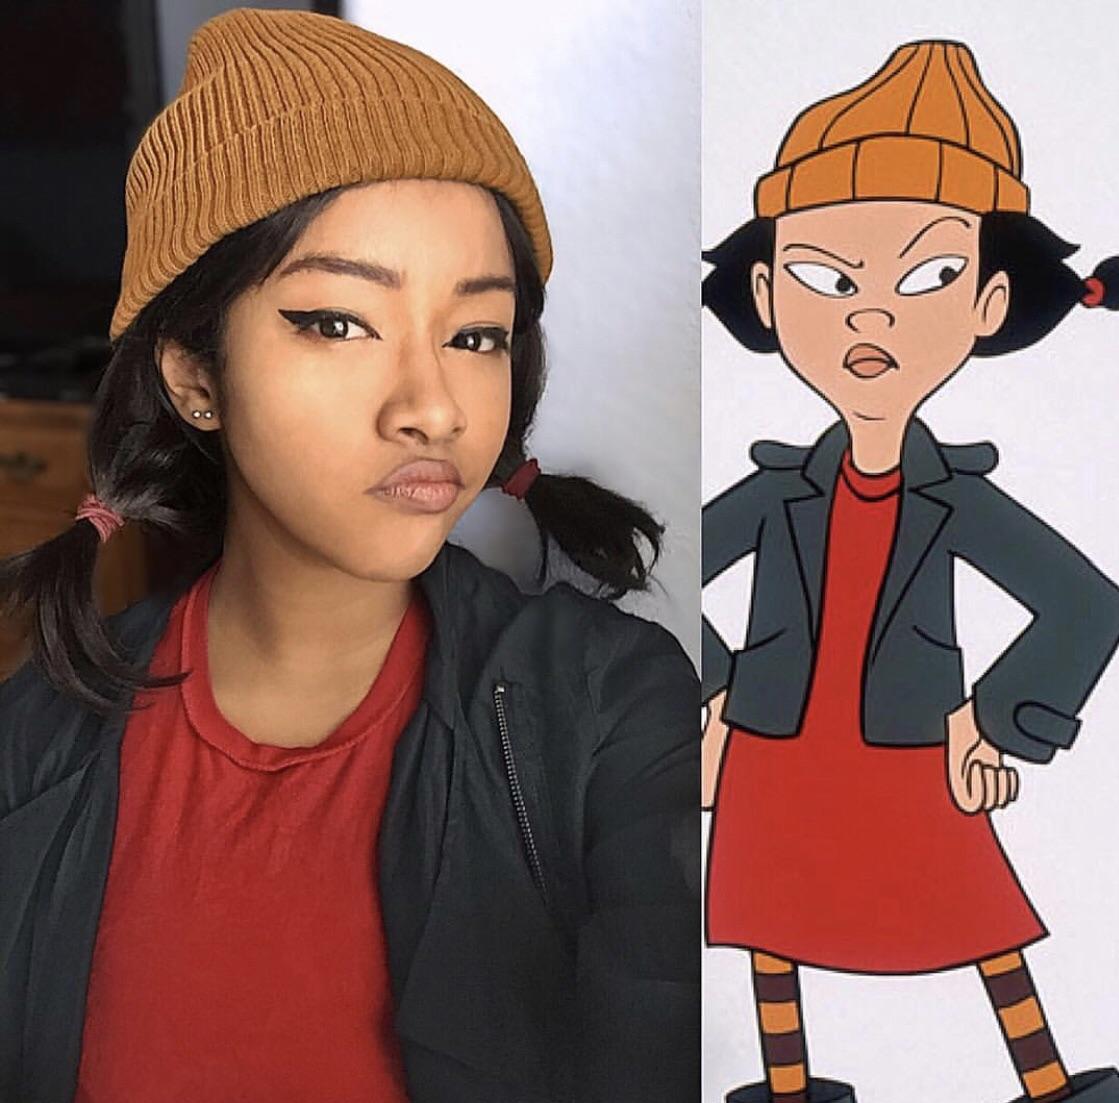 Ashley Spinelli From Recess By Uniquesor